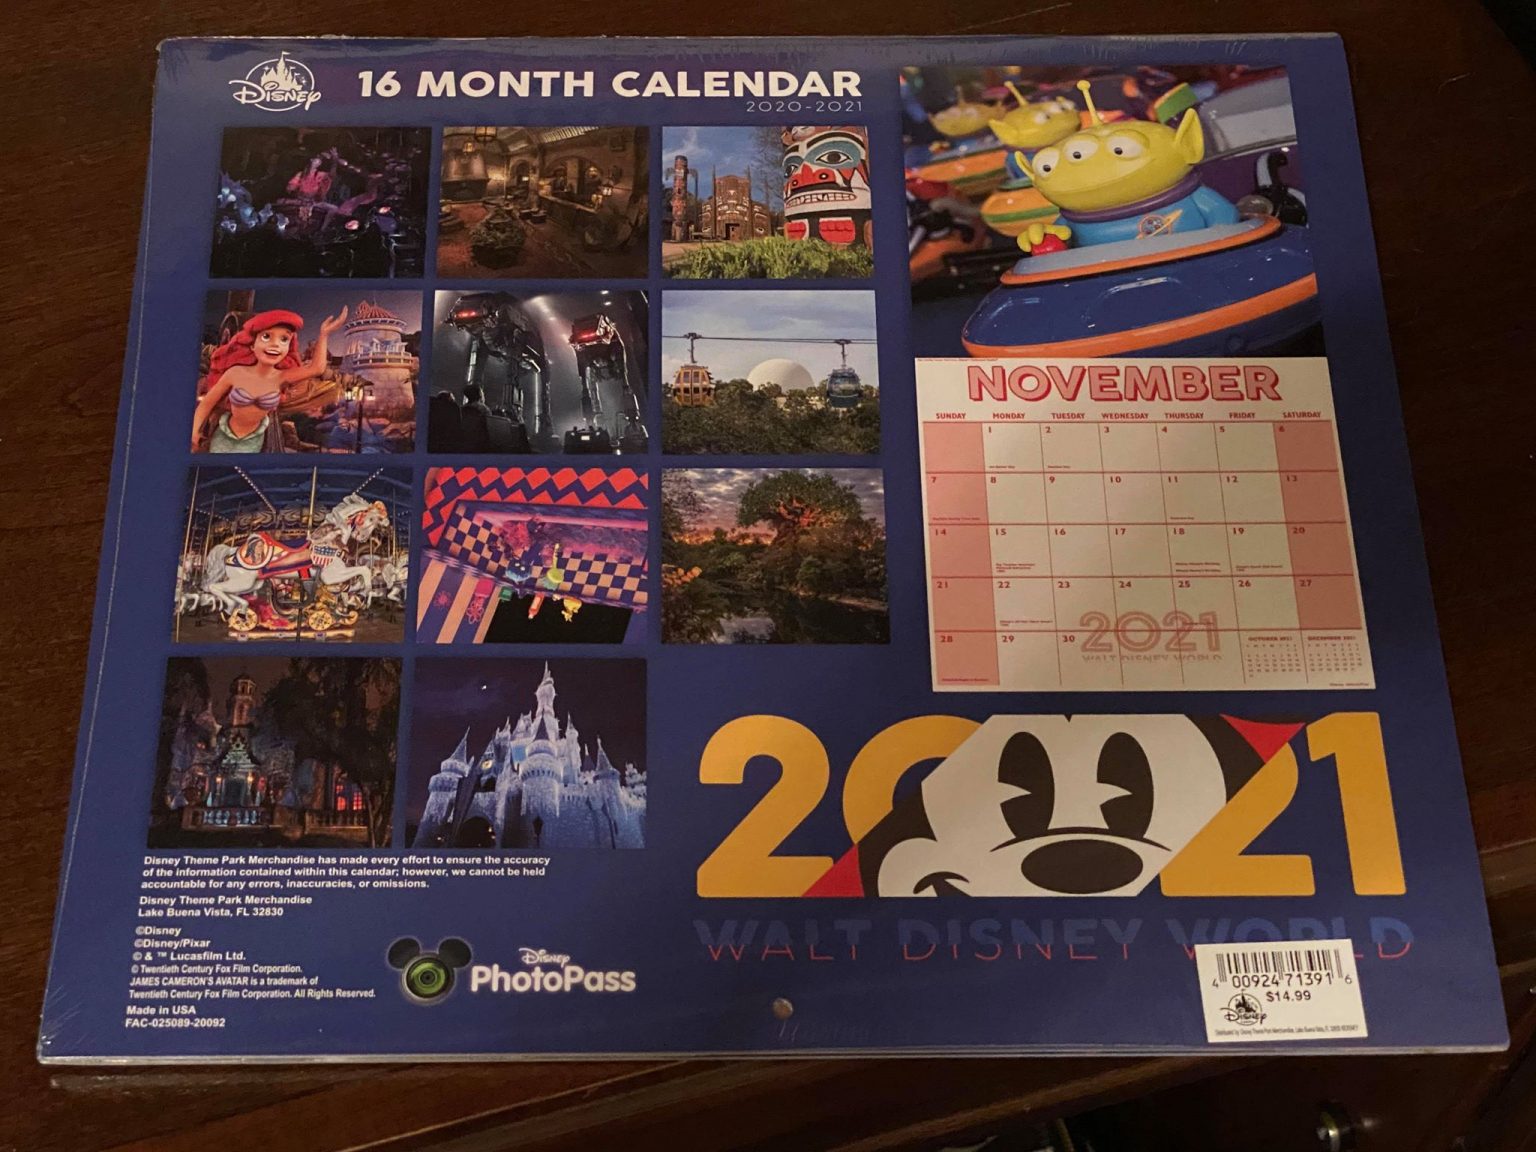 Plan Ahead for 2021 With These Disney Parks Calendars! - Disney Fashion